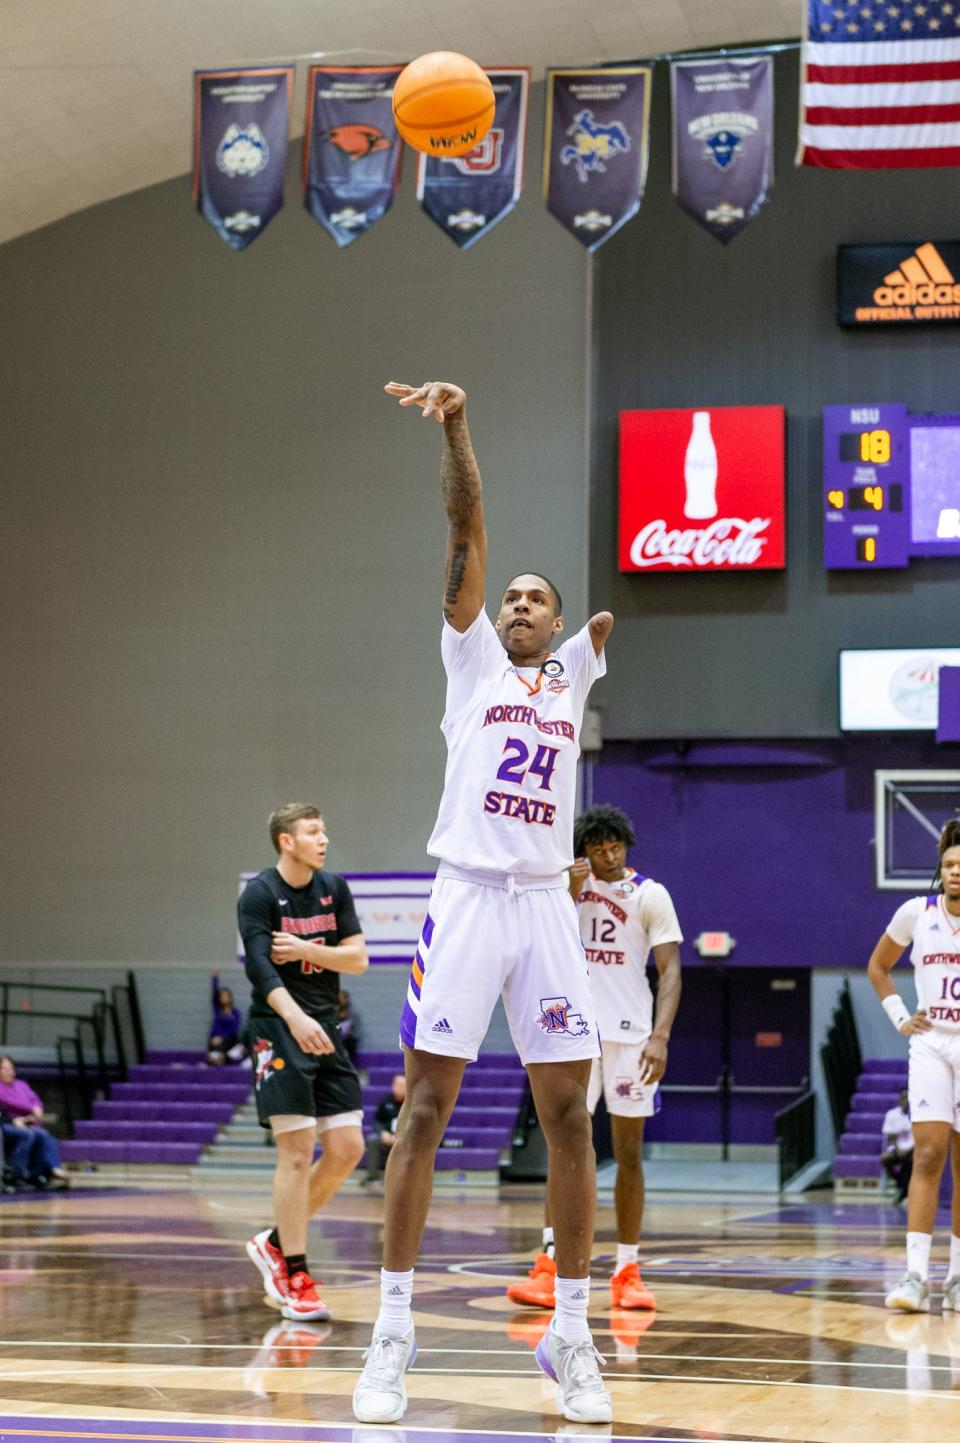 Northwestern State University guard Hansel Enmanuel shoots a free throw in a game against Illinois State on Nov. 11, 2022 in Natchitoches, La.